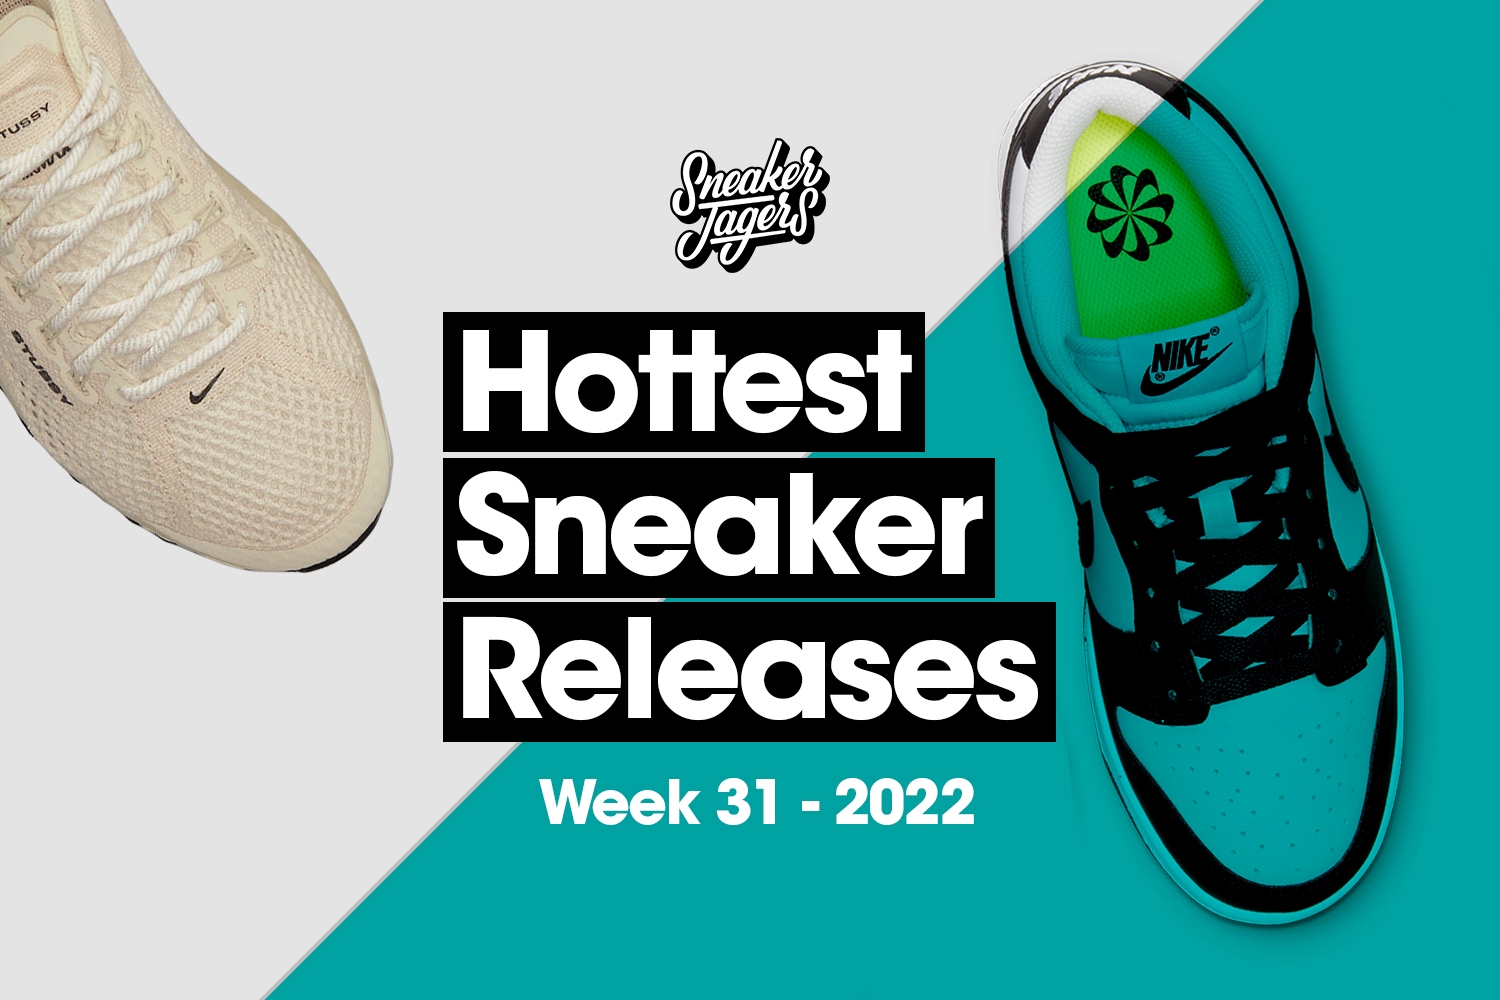 The Hottest Sneaker Releases - WK 31